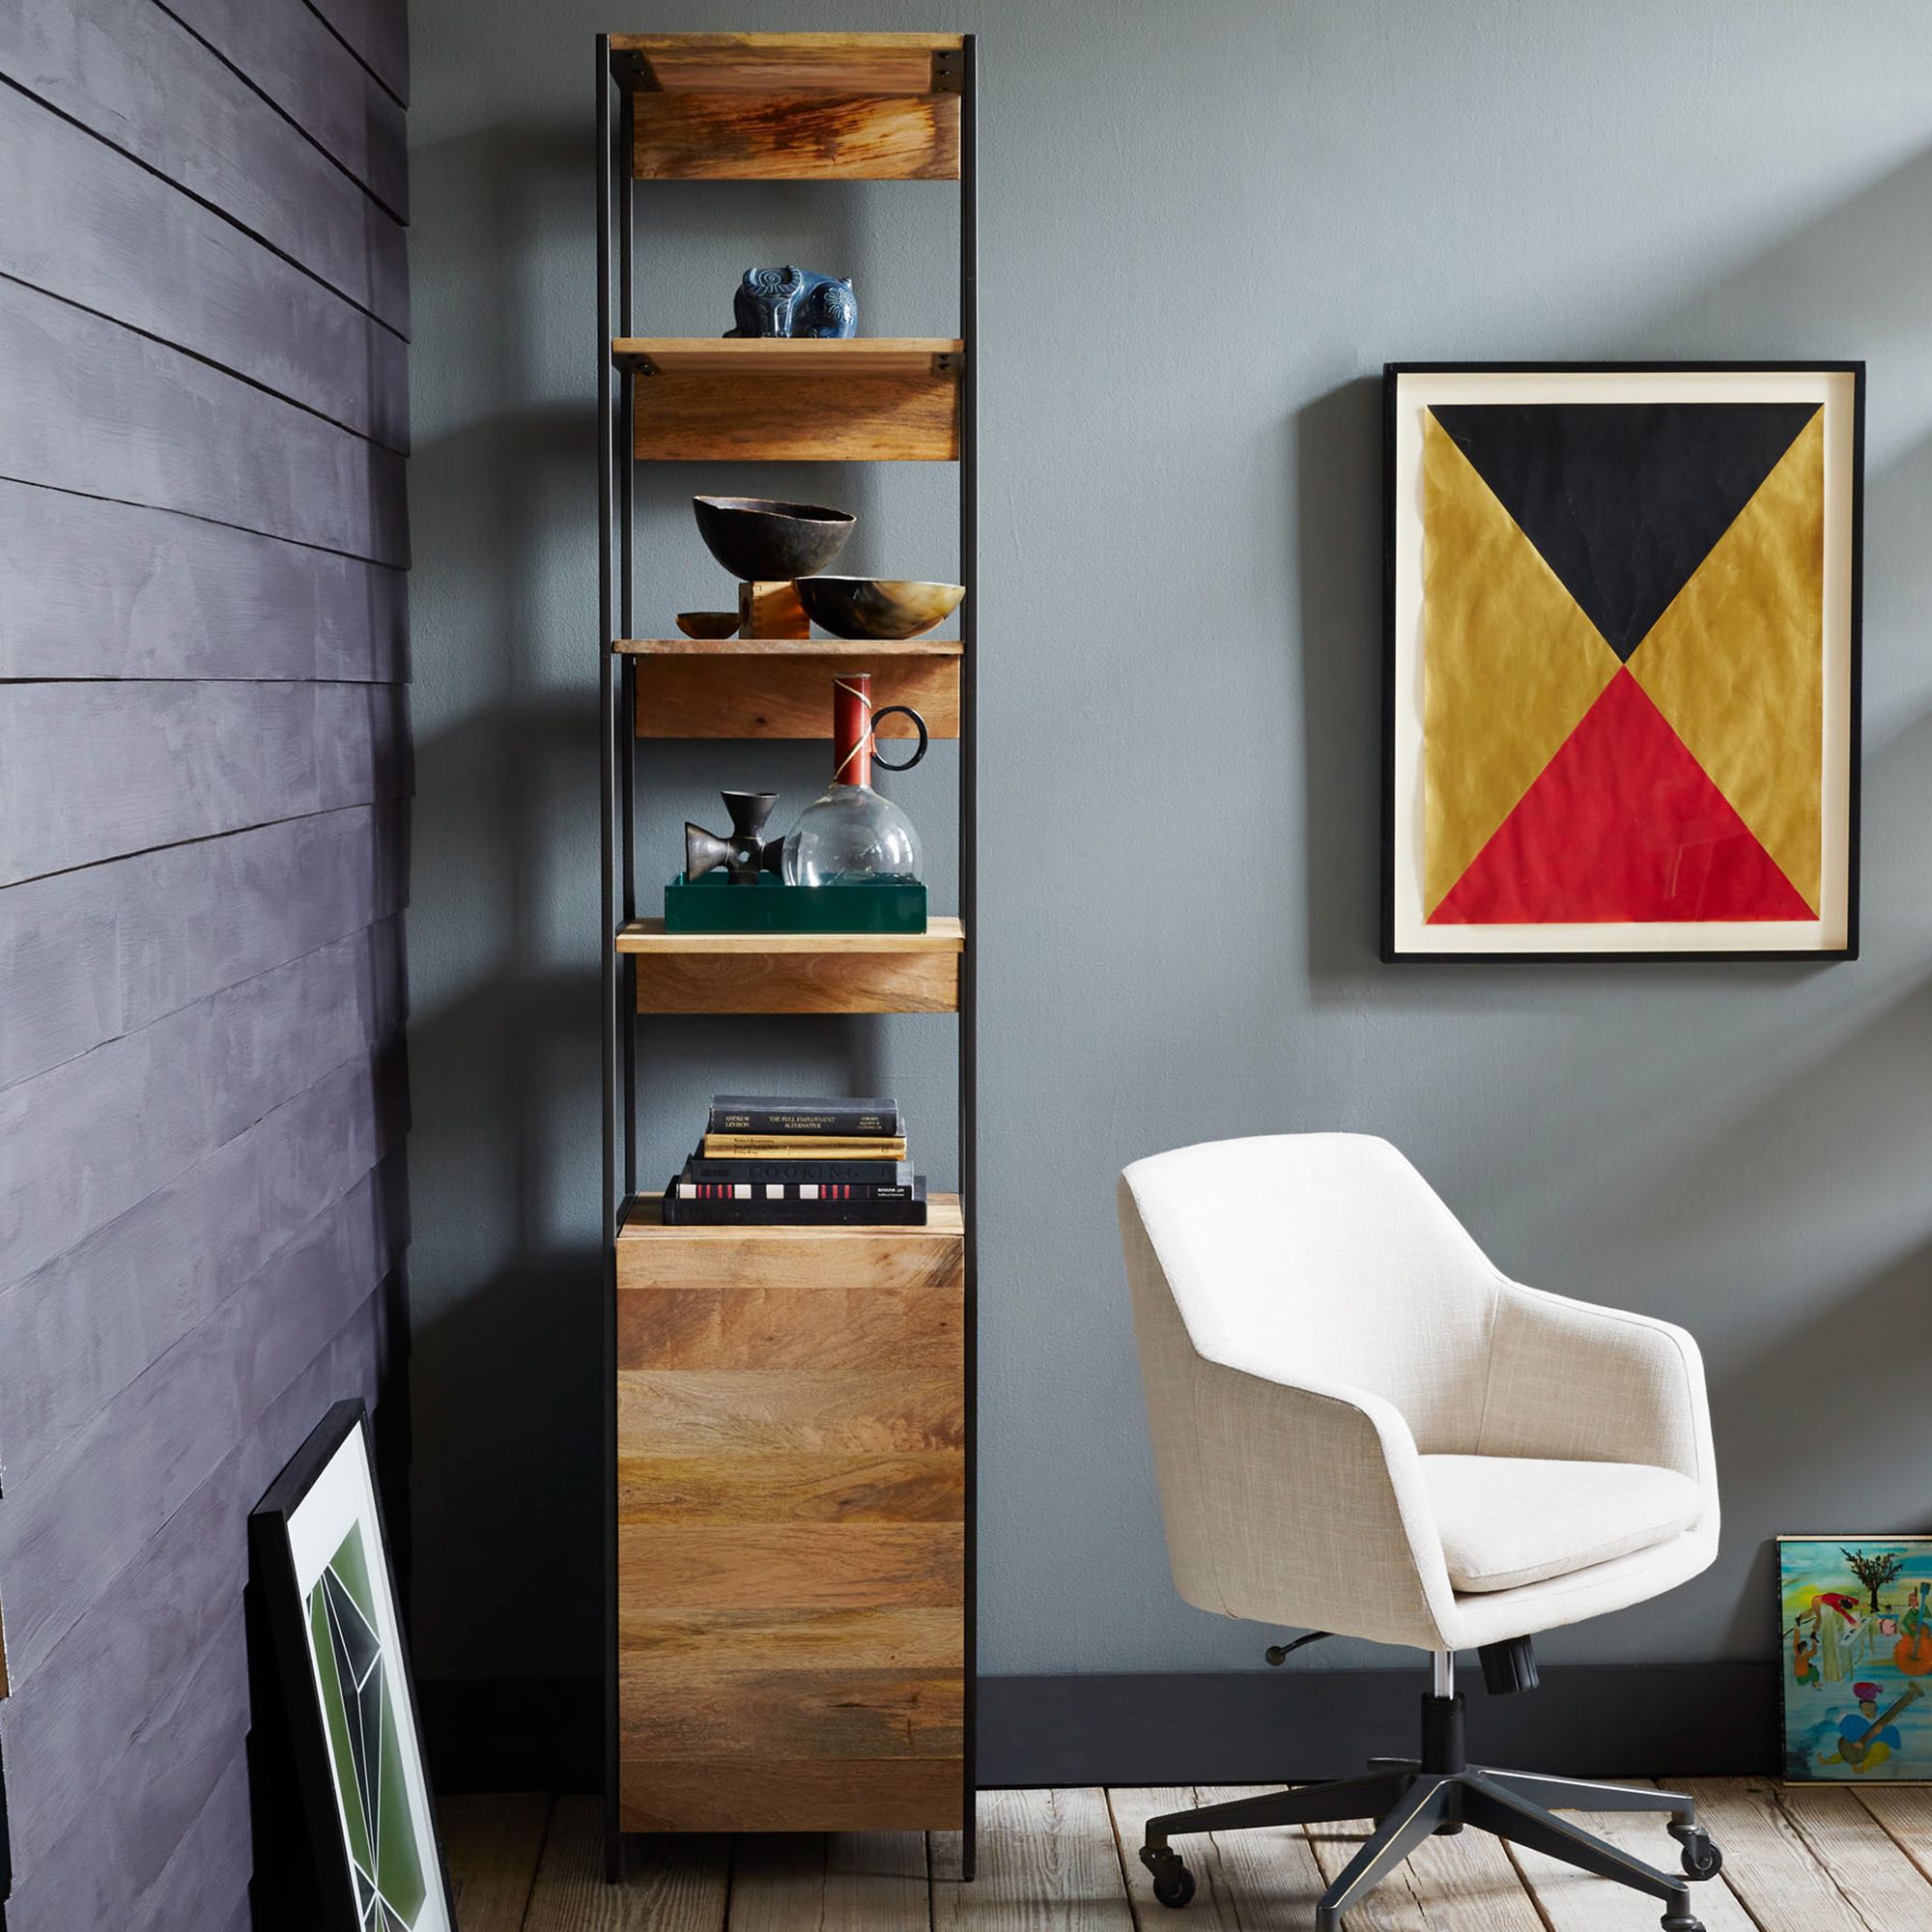 New West Elm Bookcase for Simple Design